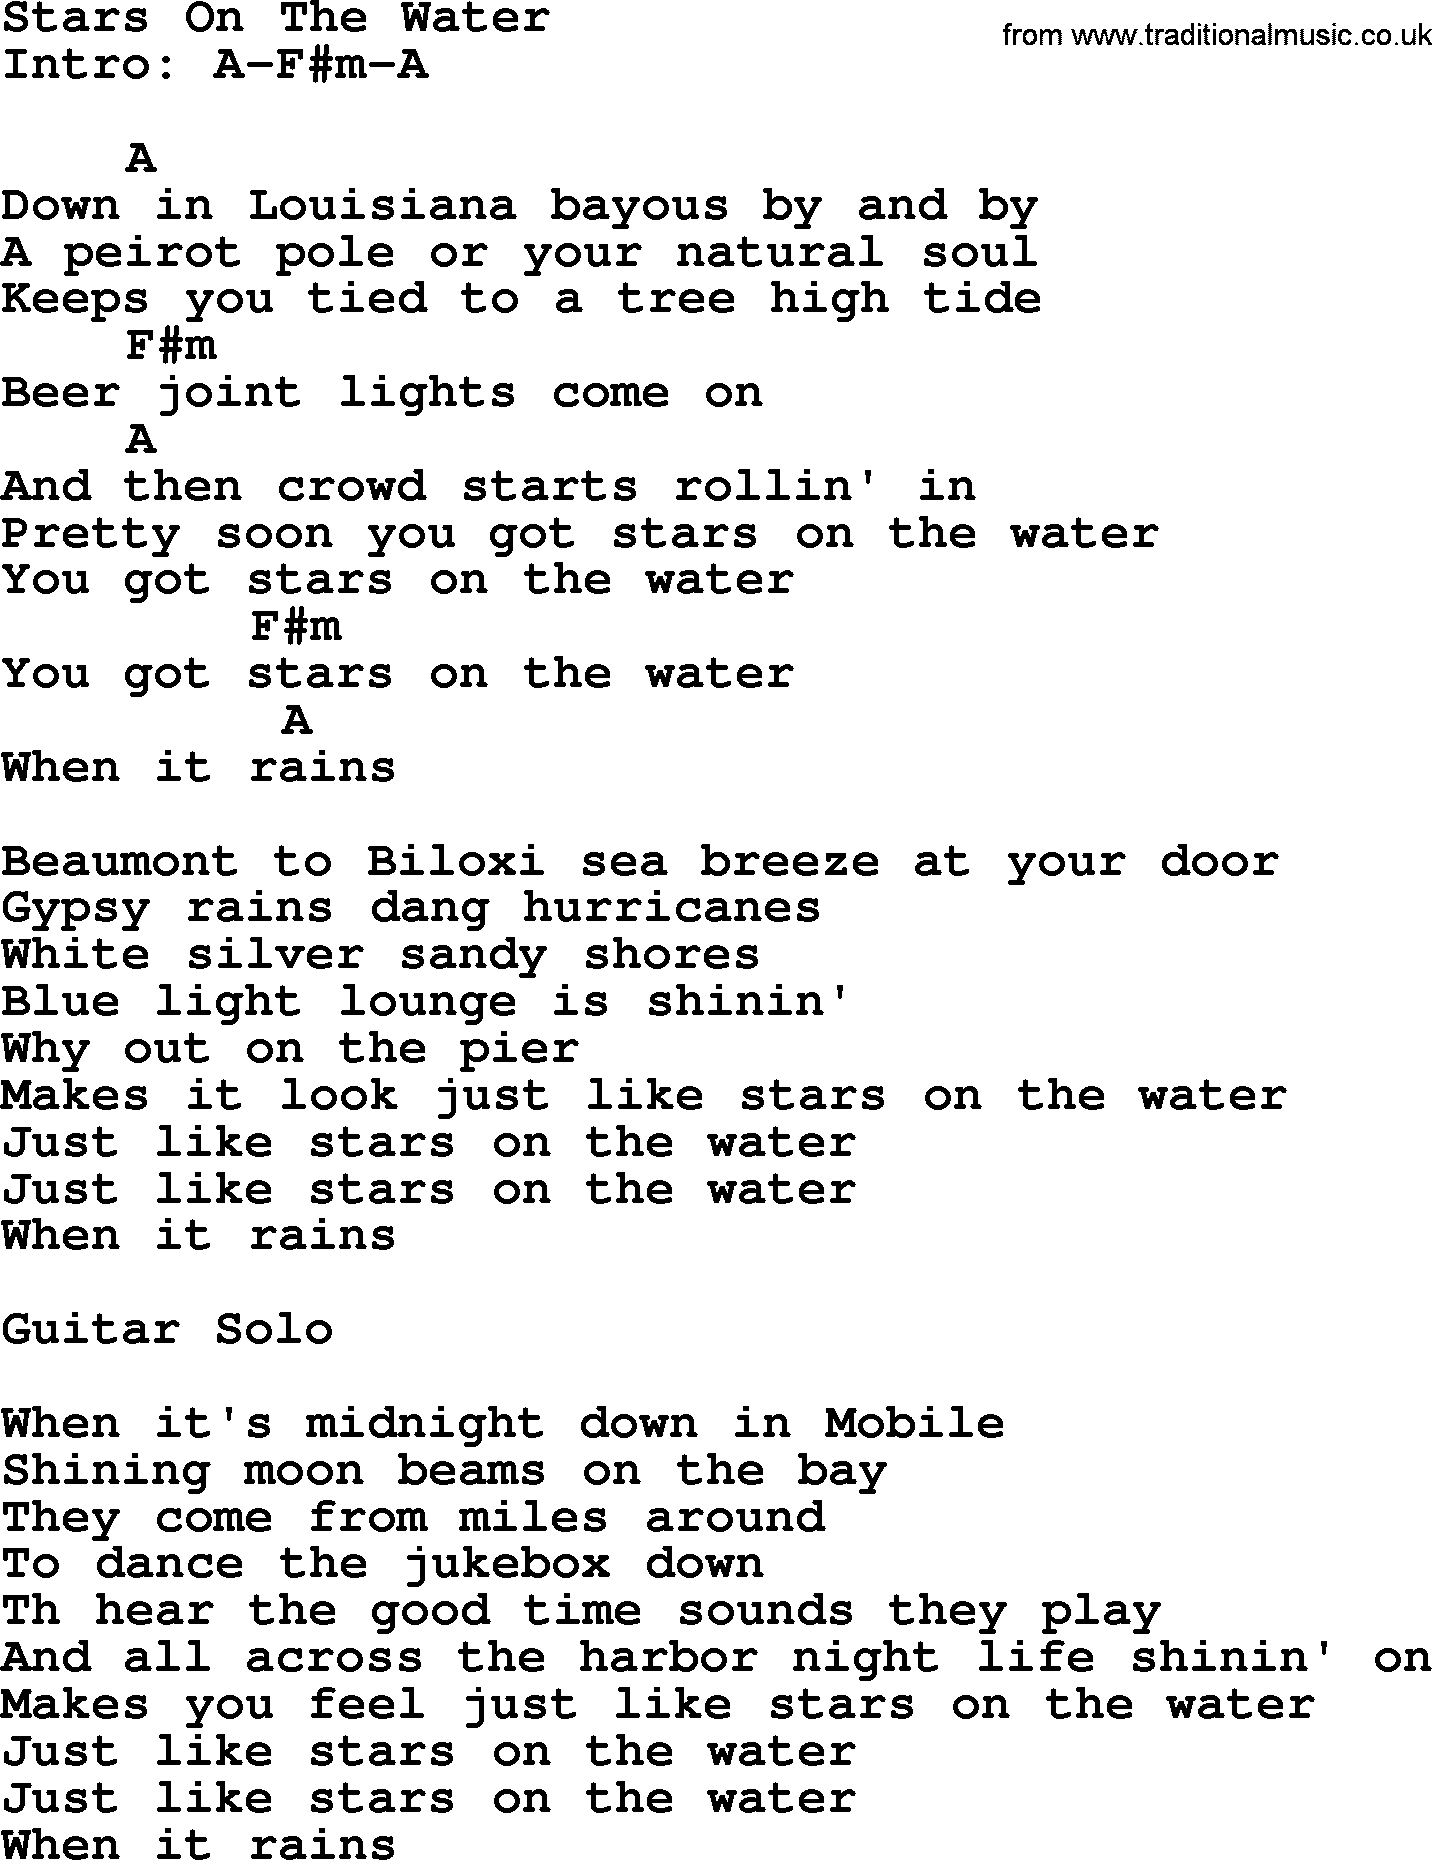 George Strait song: Stars On The Water, lyrics and chords